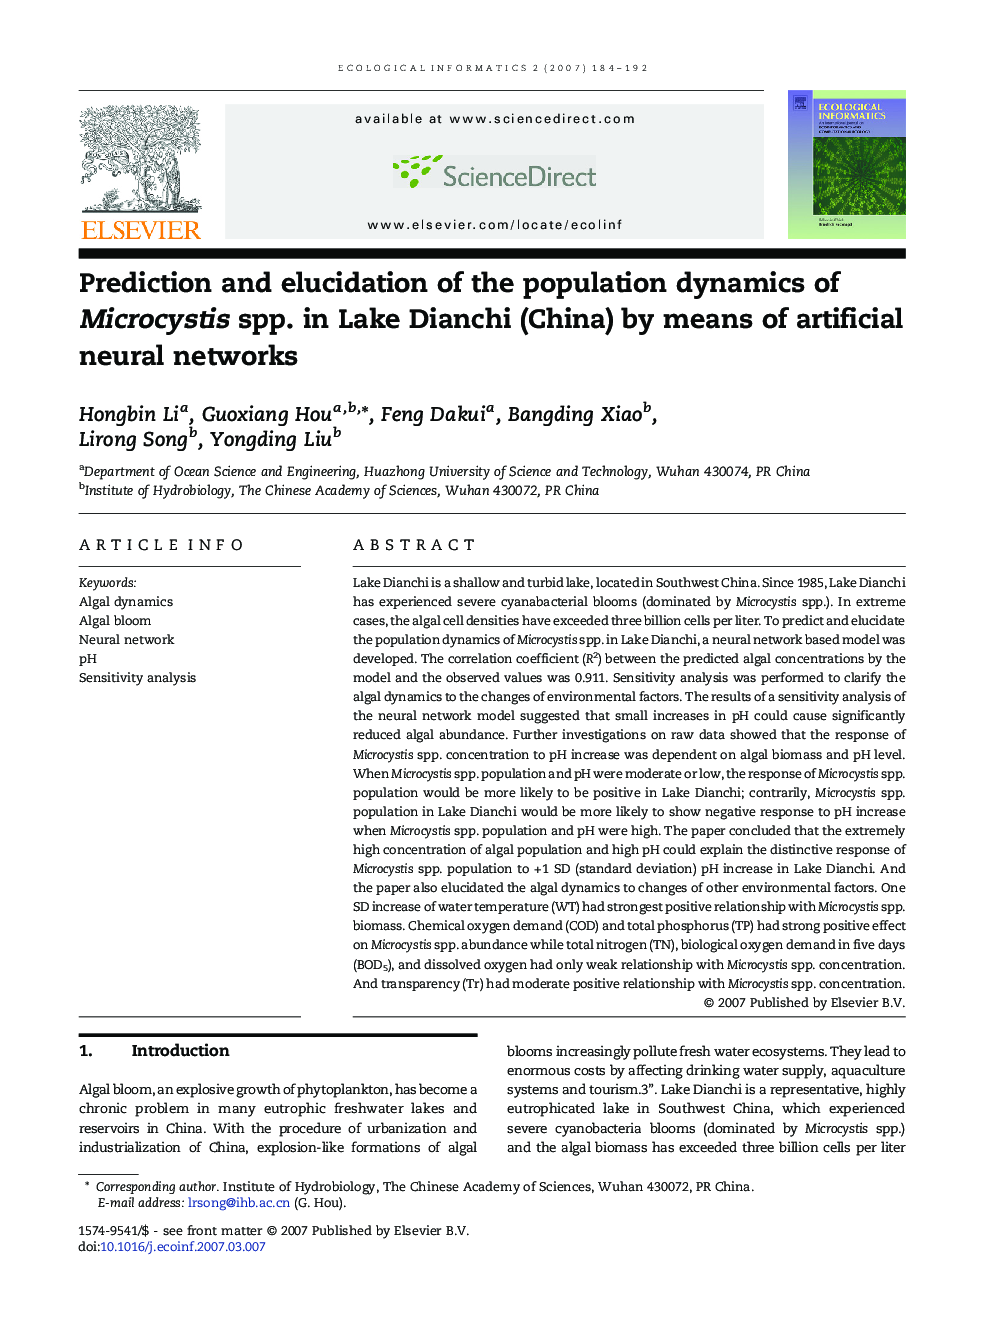 Prediction and elucidation of the population dynamics of Microcystis spp. in Lake Dianchi (China) by means of artificial neural networks